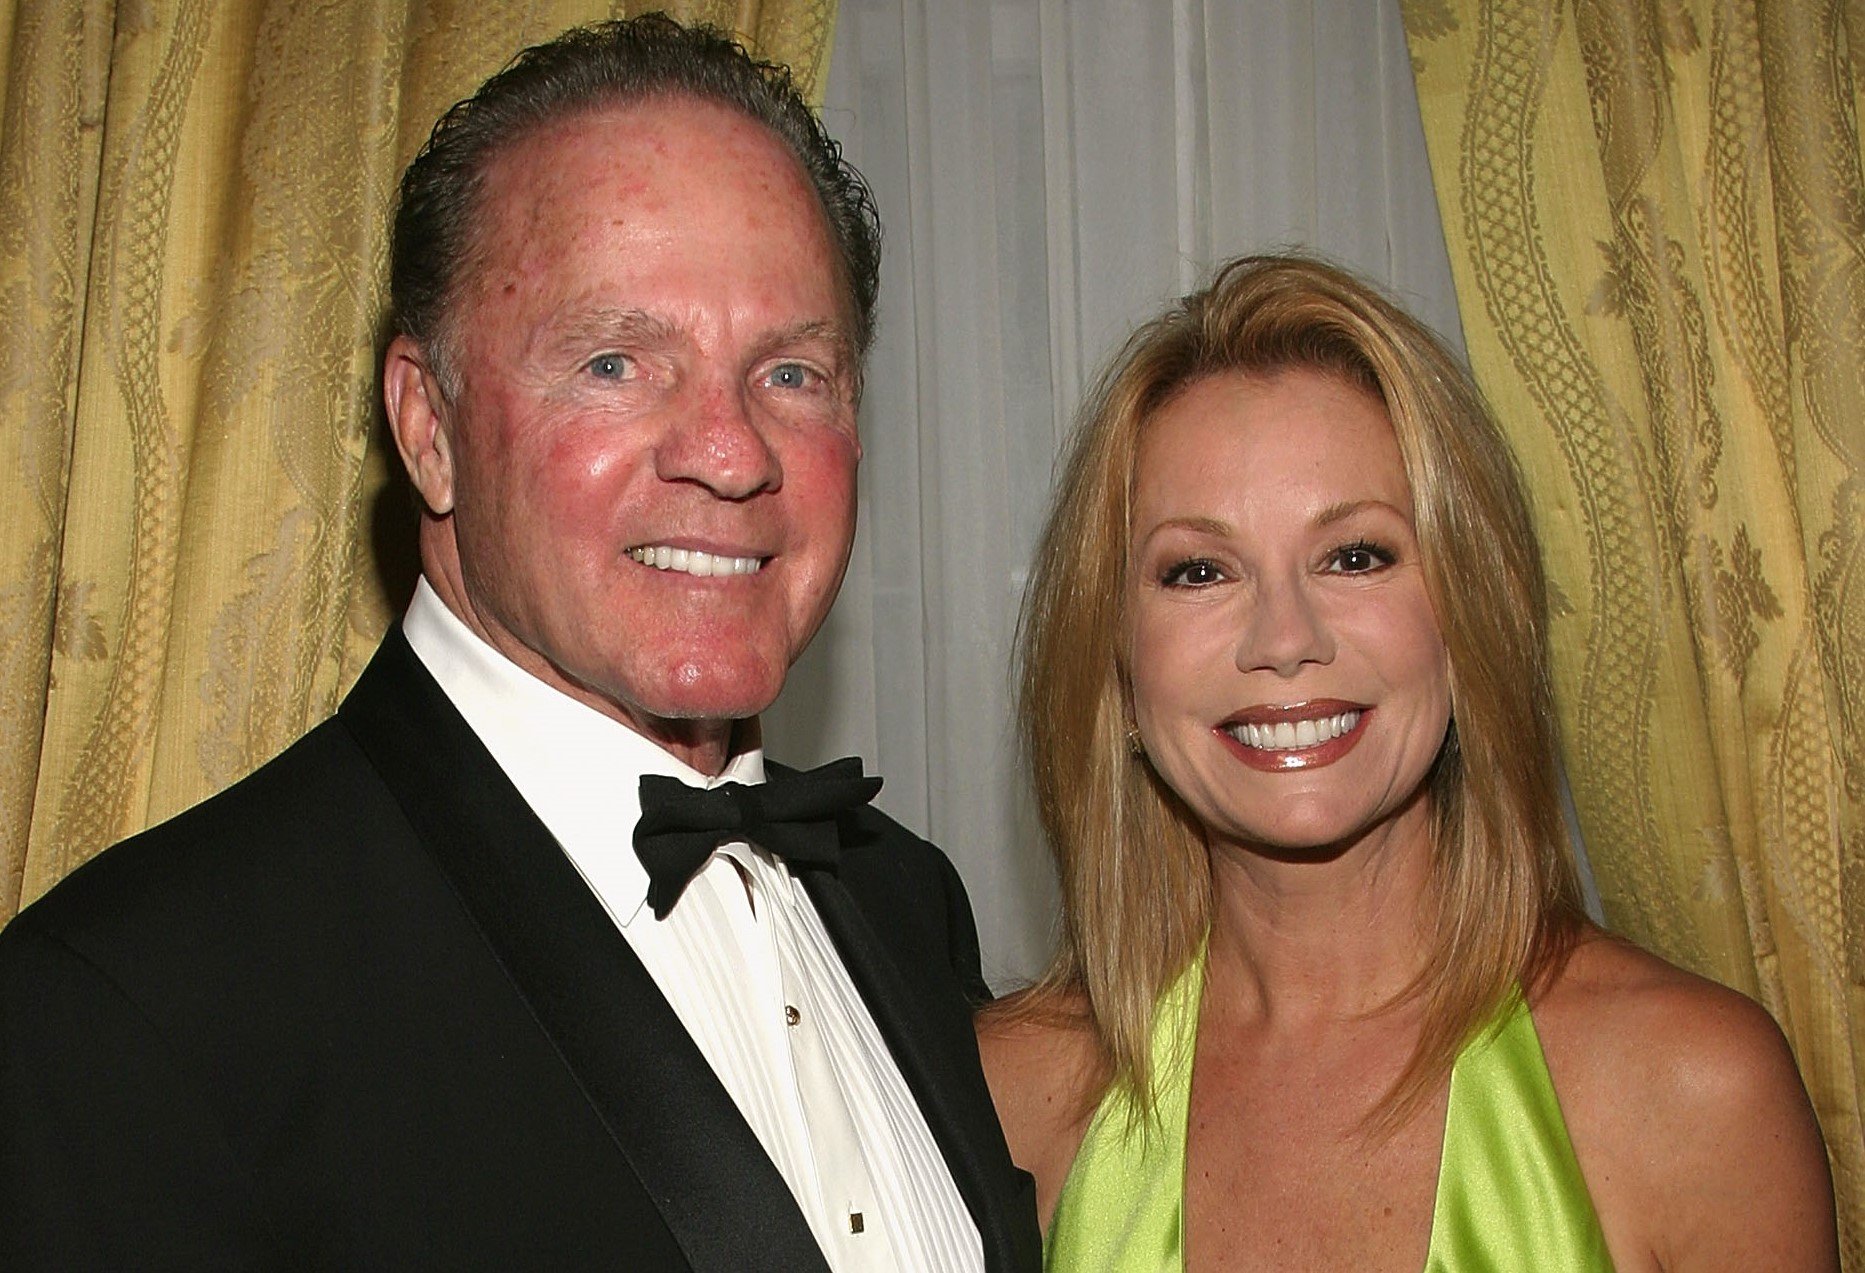 Frank Gifford with Kathie Lee Gifford